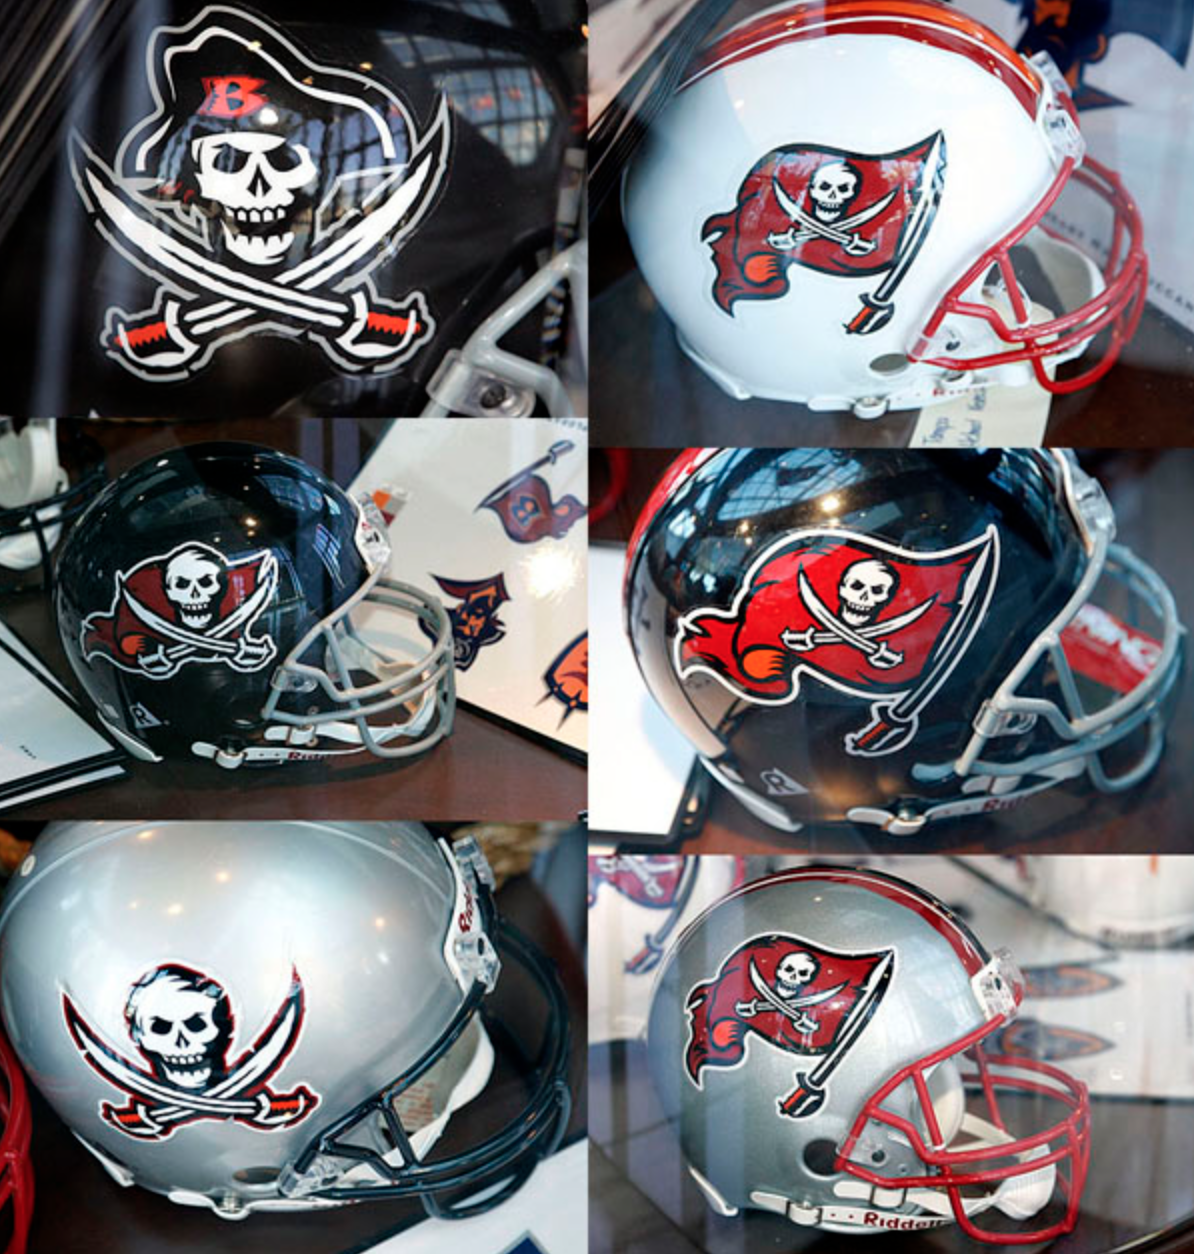 Buccaneers Helmets That Didn't Make The Cut - Daily Snark